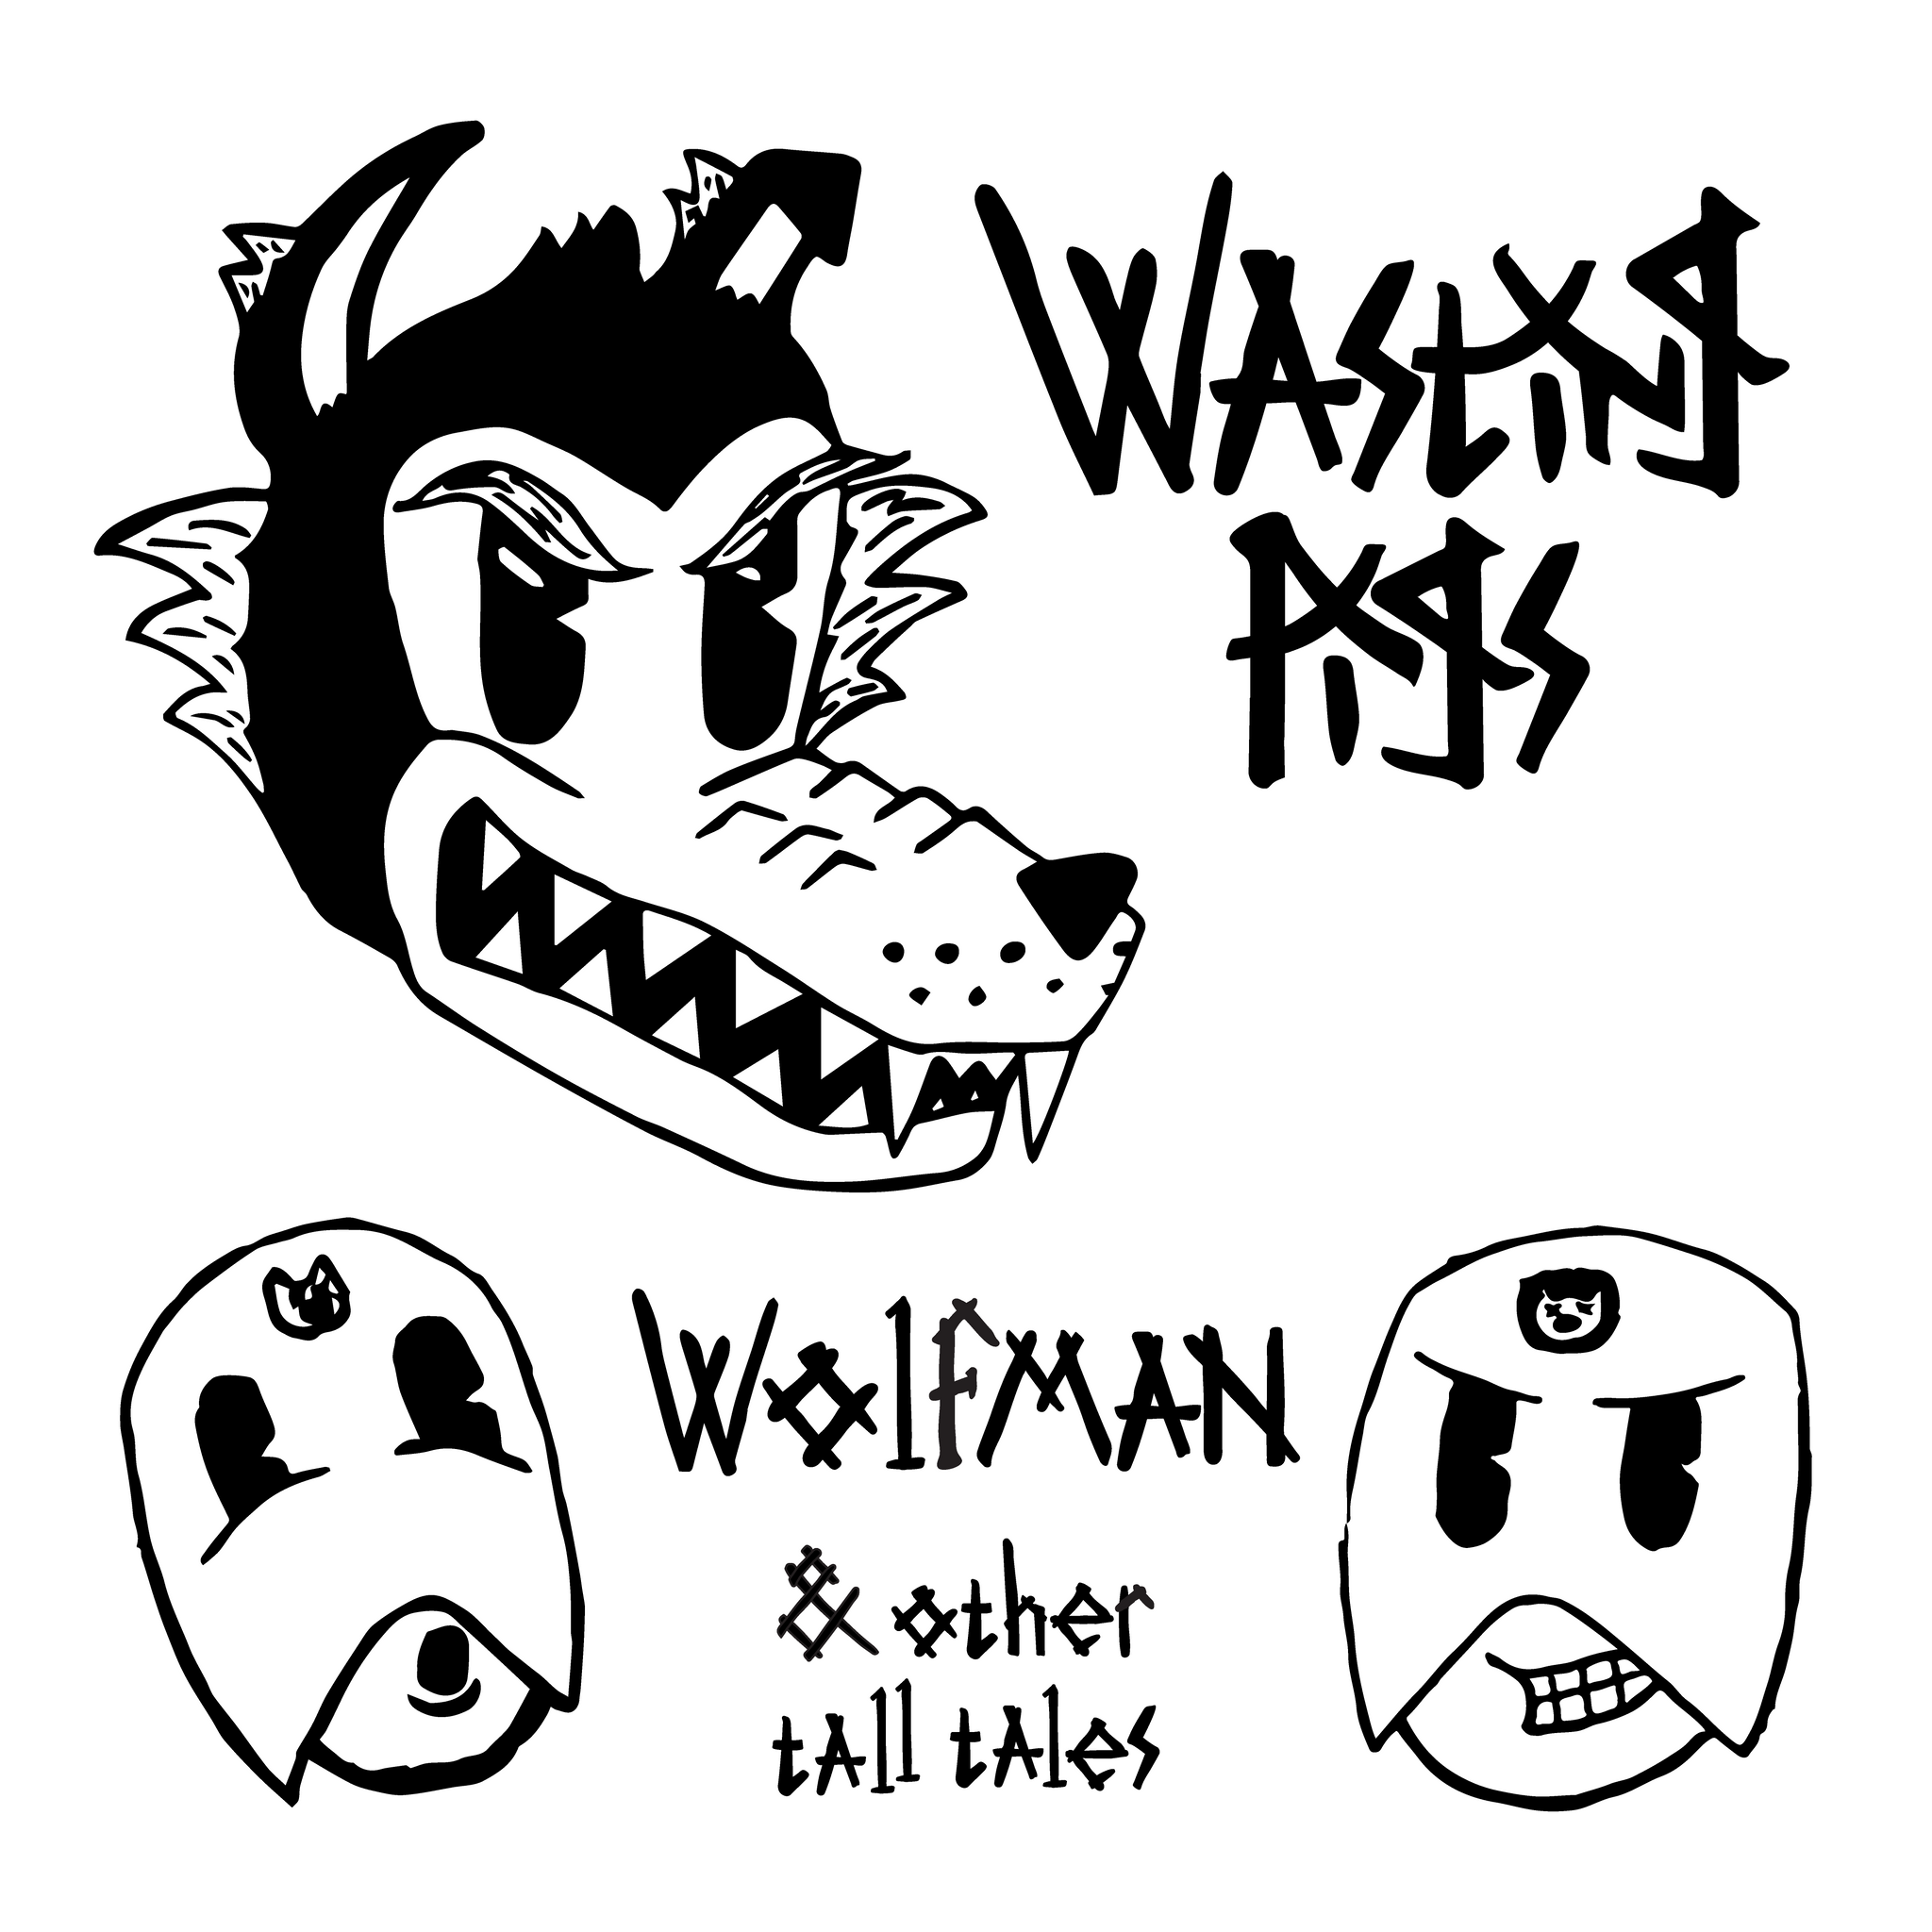 Wasting Pigs - Wolfman and Other Tall Tales